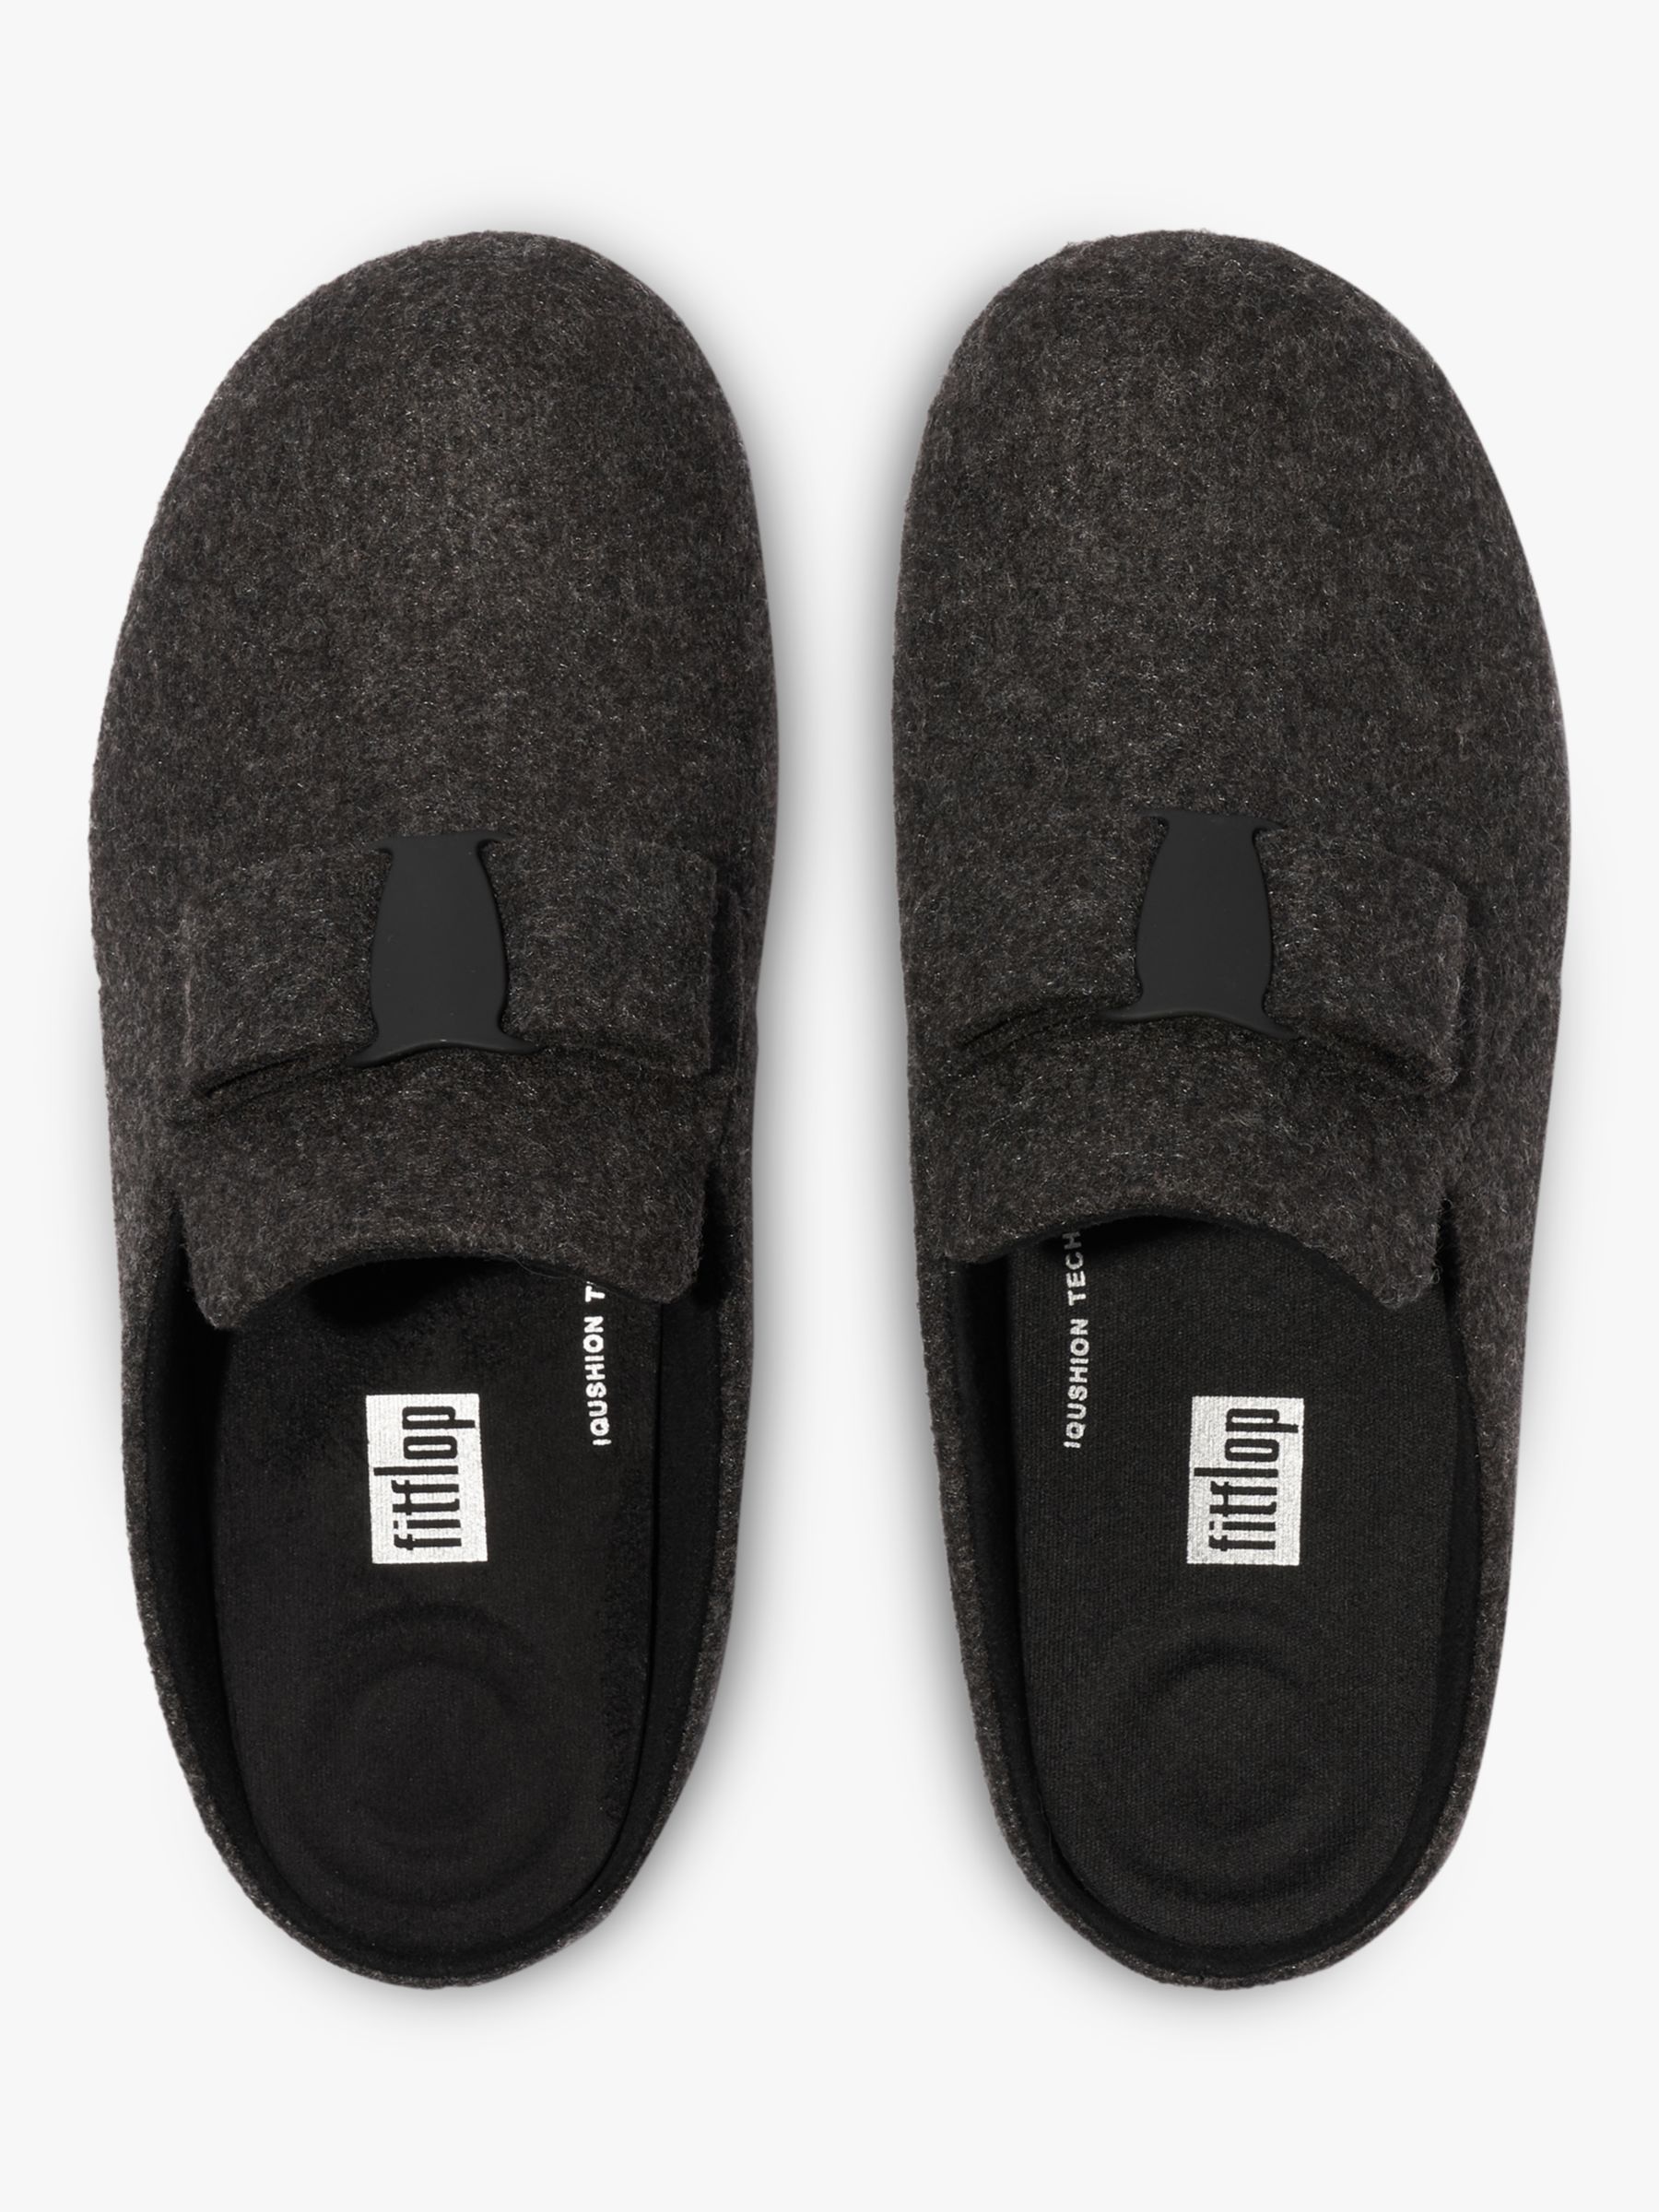 FitFlop Bow Mule Slippers, All Black at John Lewis & Partners